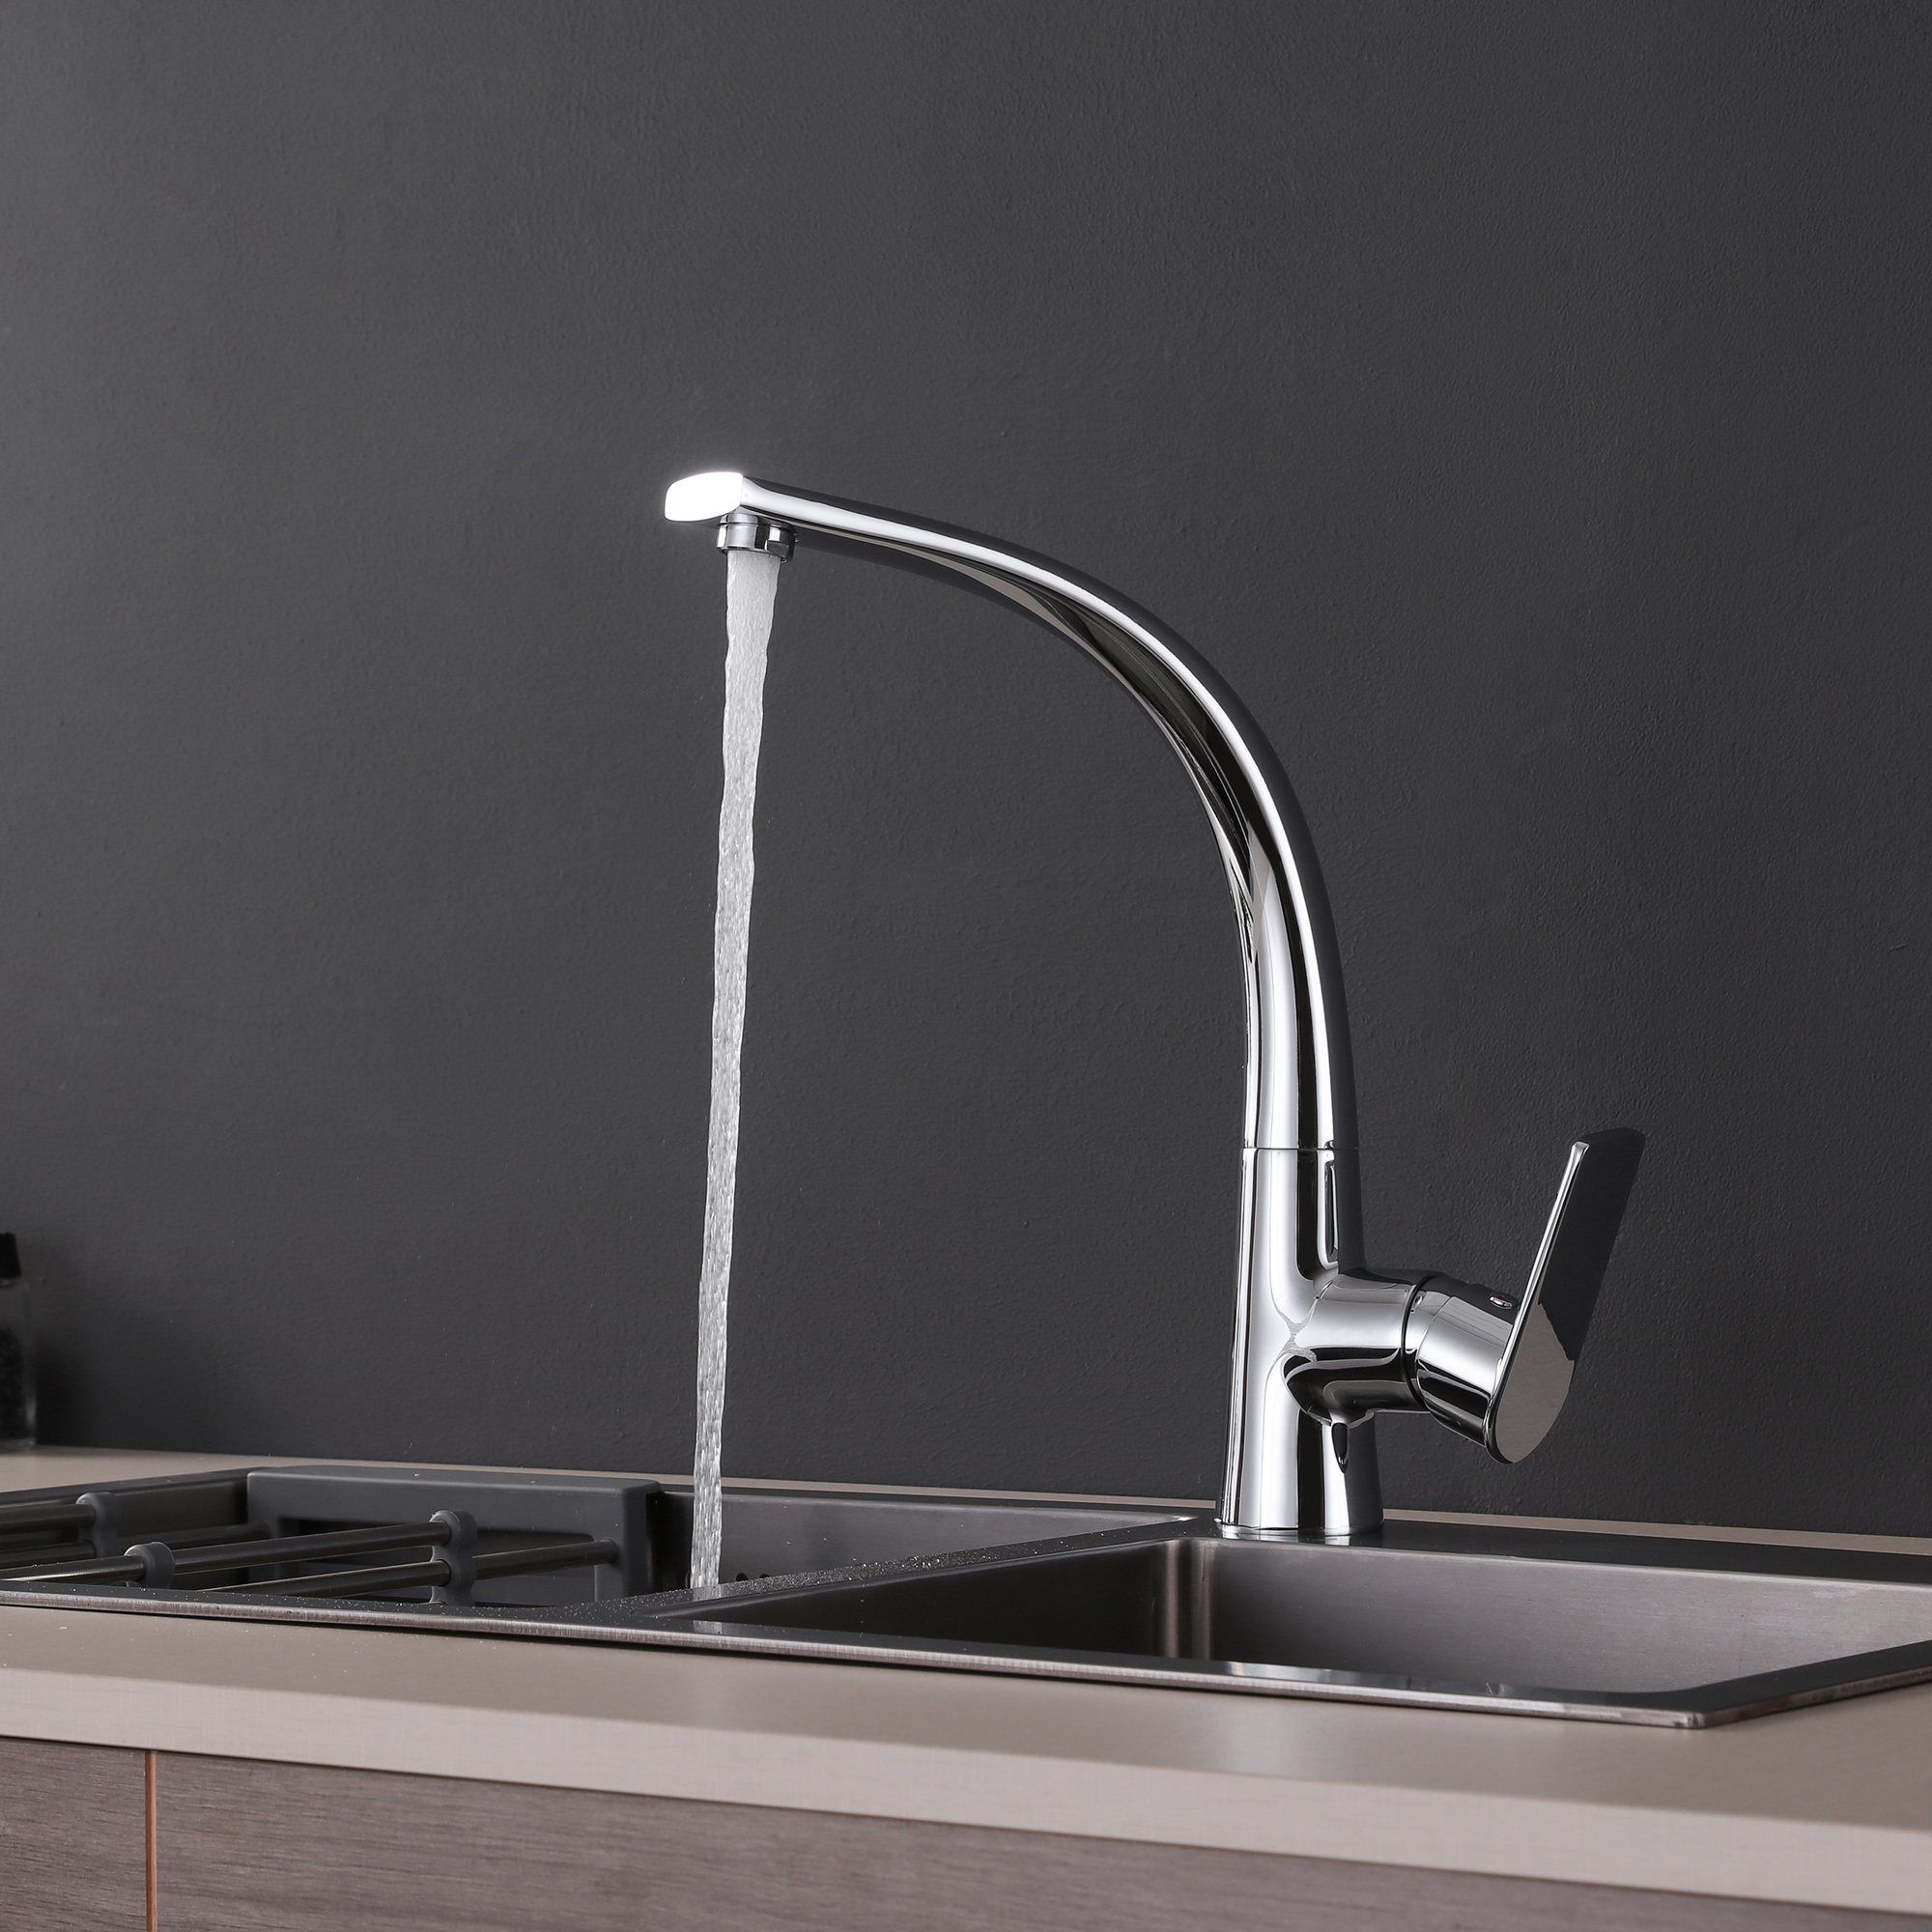 Brass Square Spout New Design CE Certificate Popular Style Industrial Faucet for Kitchen Sink